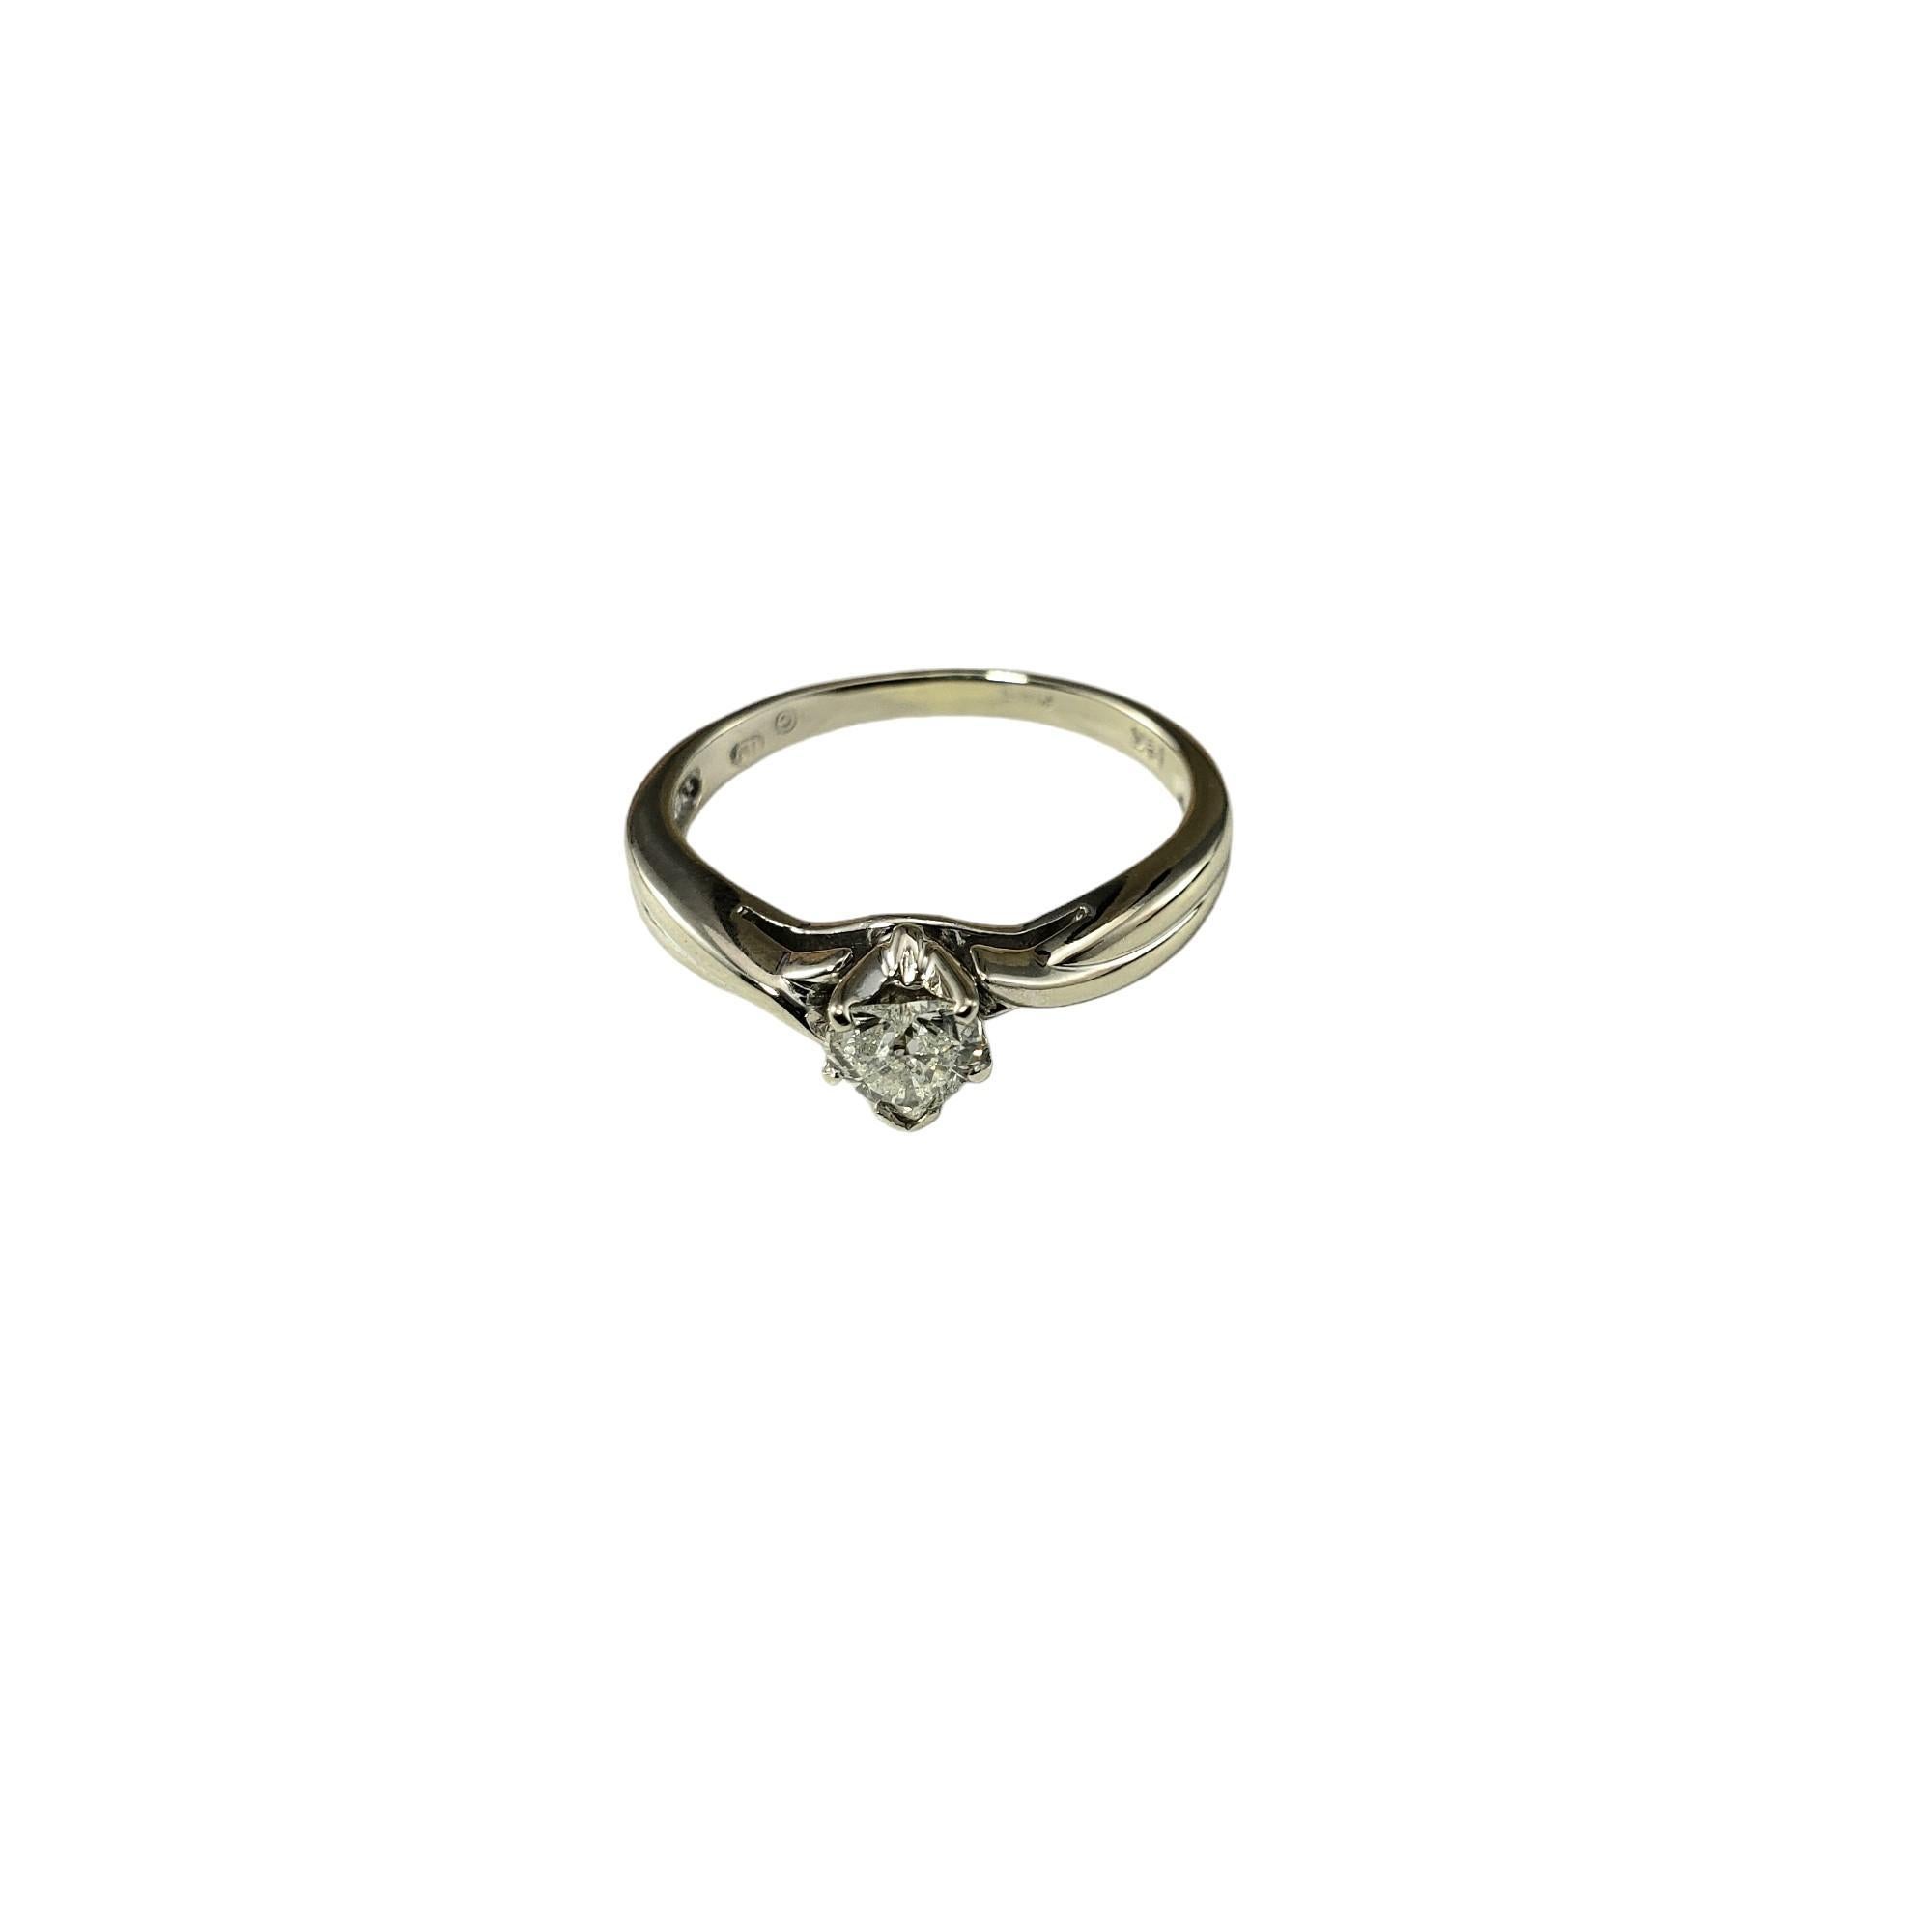 14 Karat White Gold Heart Shaped Diamond Engagement Ring Size 7.5

This sparkling engagement ring features one heart shaped diamond set in classic 14K white gold.  

Shank: 2 mm.

Approximate diamond weight: .30 ct.

Diamond color: J

Diamond